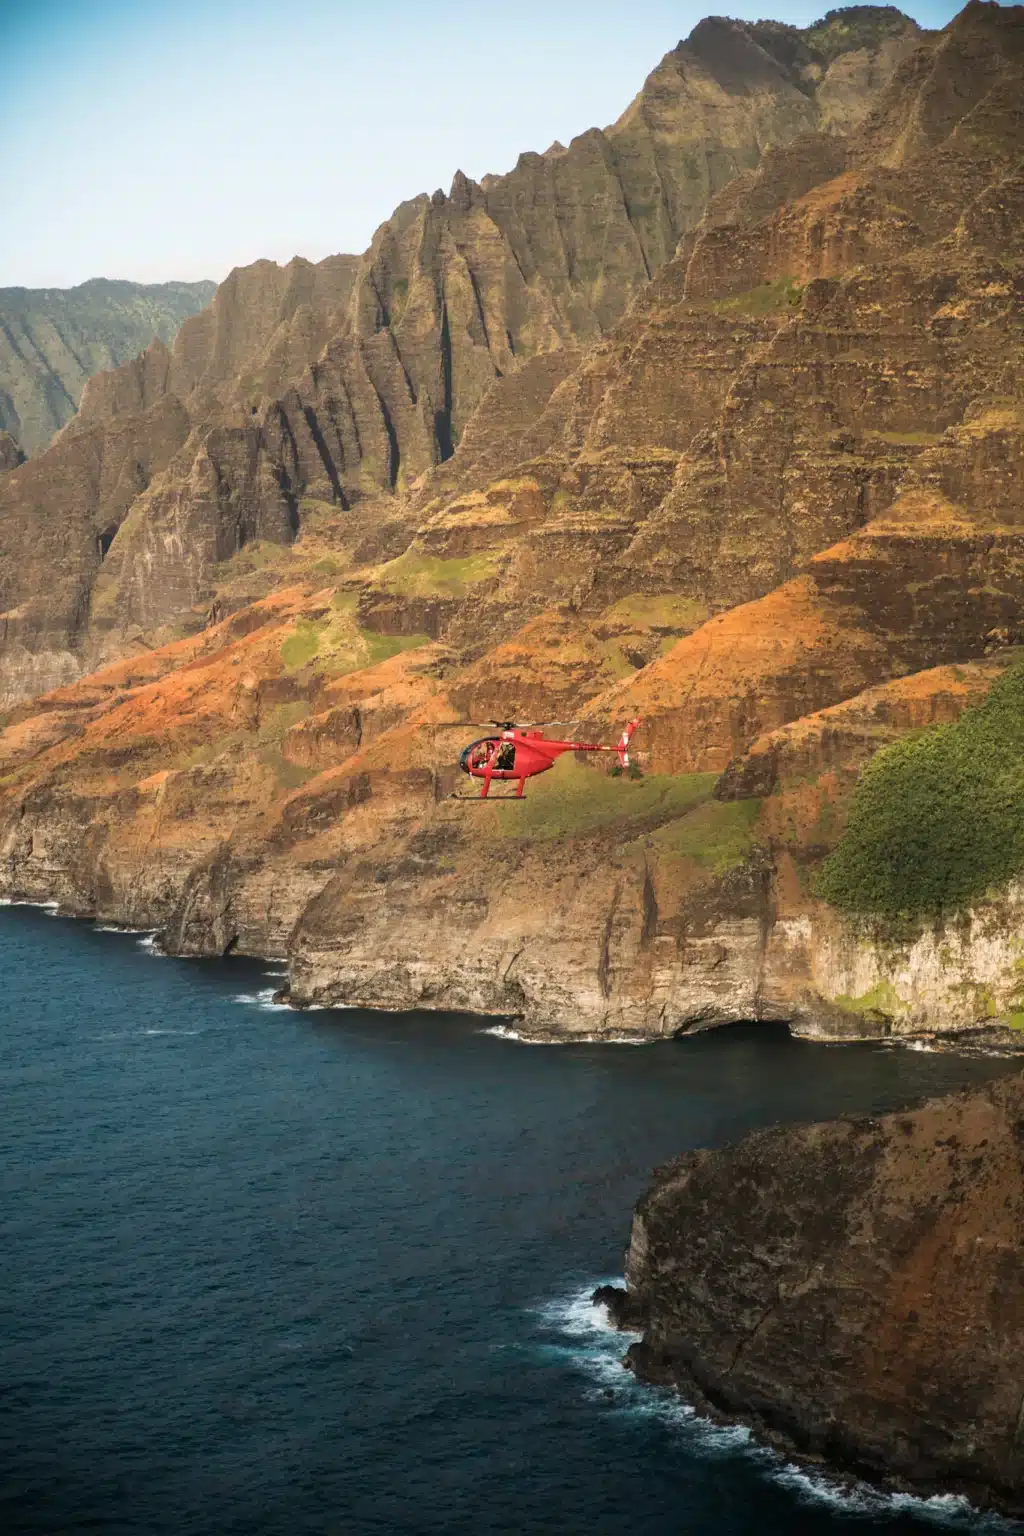 Hughes 500 Doors-Off Helicopter: Air Activity Tour in the town of Lihue on Kauai